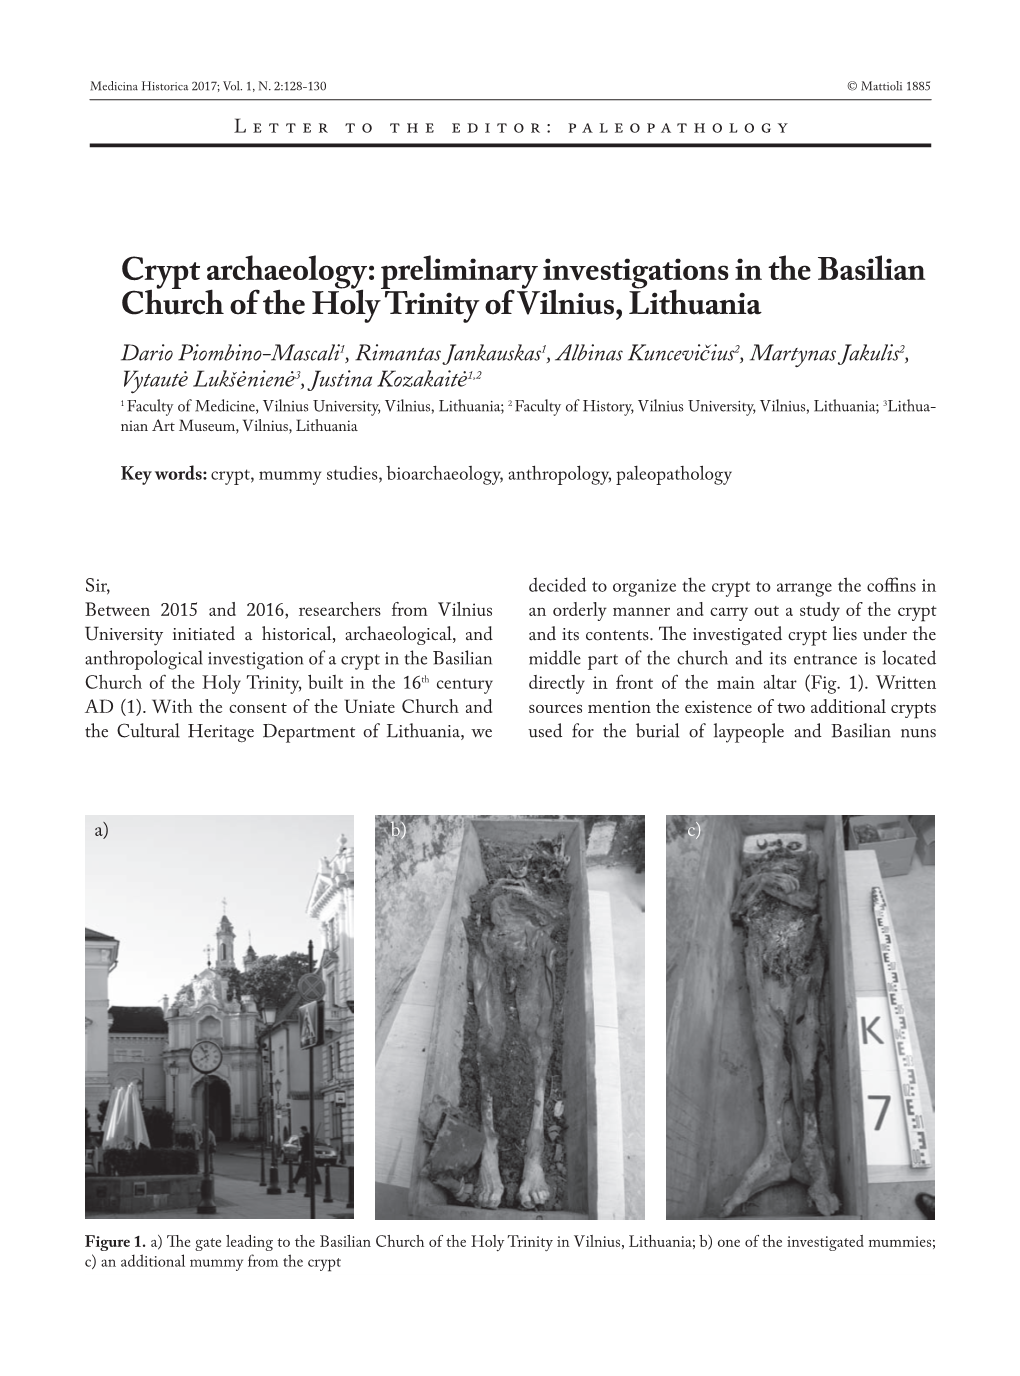 Crypt Archaeology: Preliminary Investigations in the Basilian